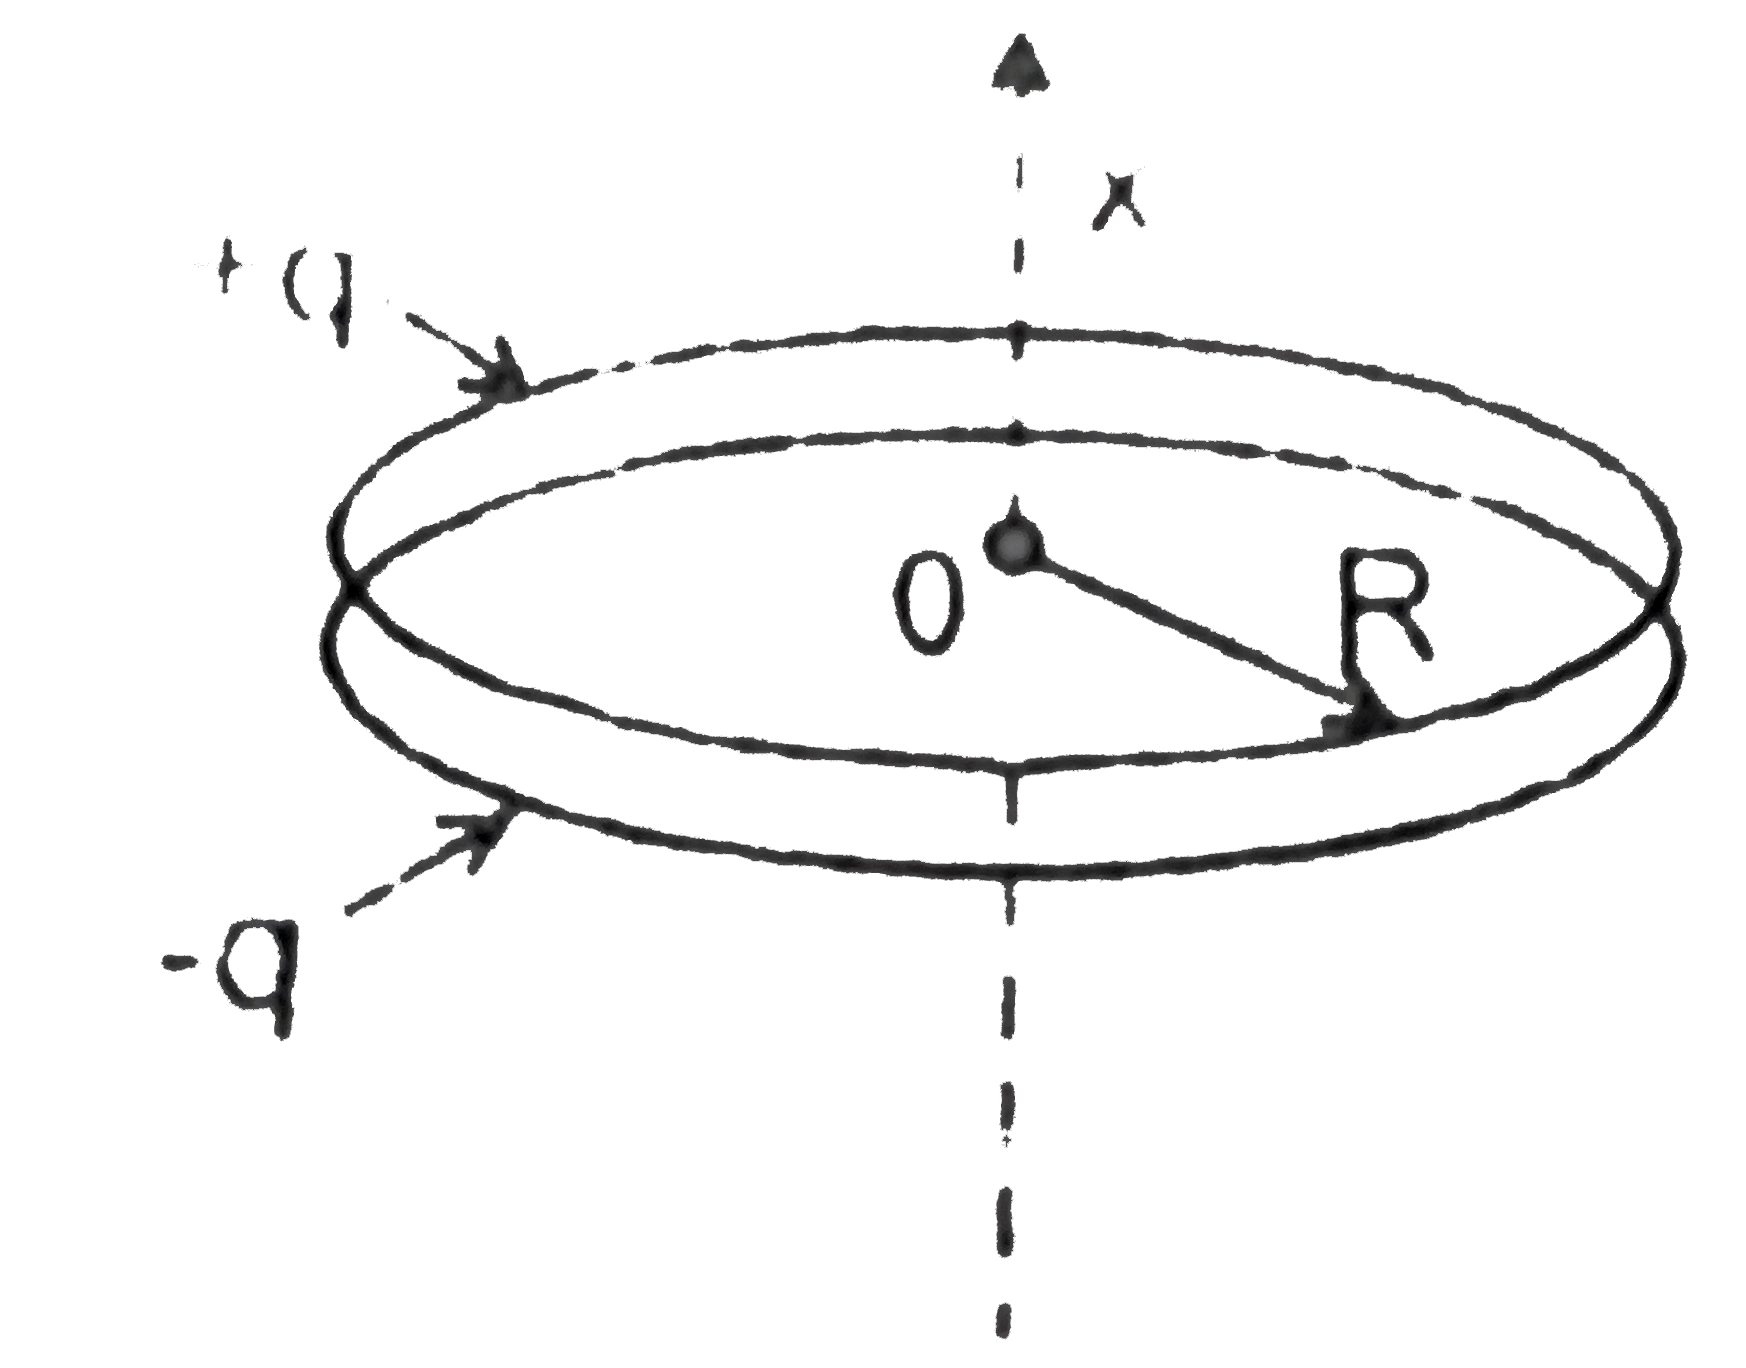 Two coaxial rings, eacg of radius R, made of thin wire are separated by a small distabce l(l lt lt R) and carry the charges q and -q. Find the electric field potential and strength at the axis of the system as a function of the x coordinate (see figure). Investigate these functions at |x| gt gt R